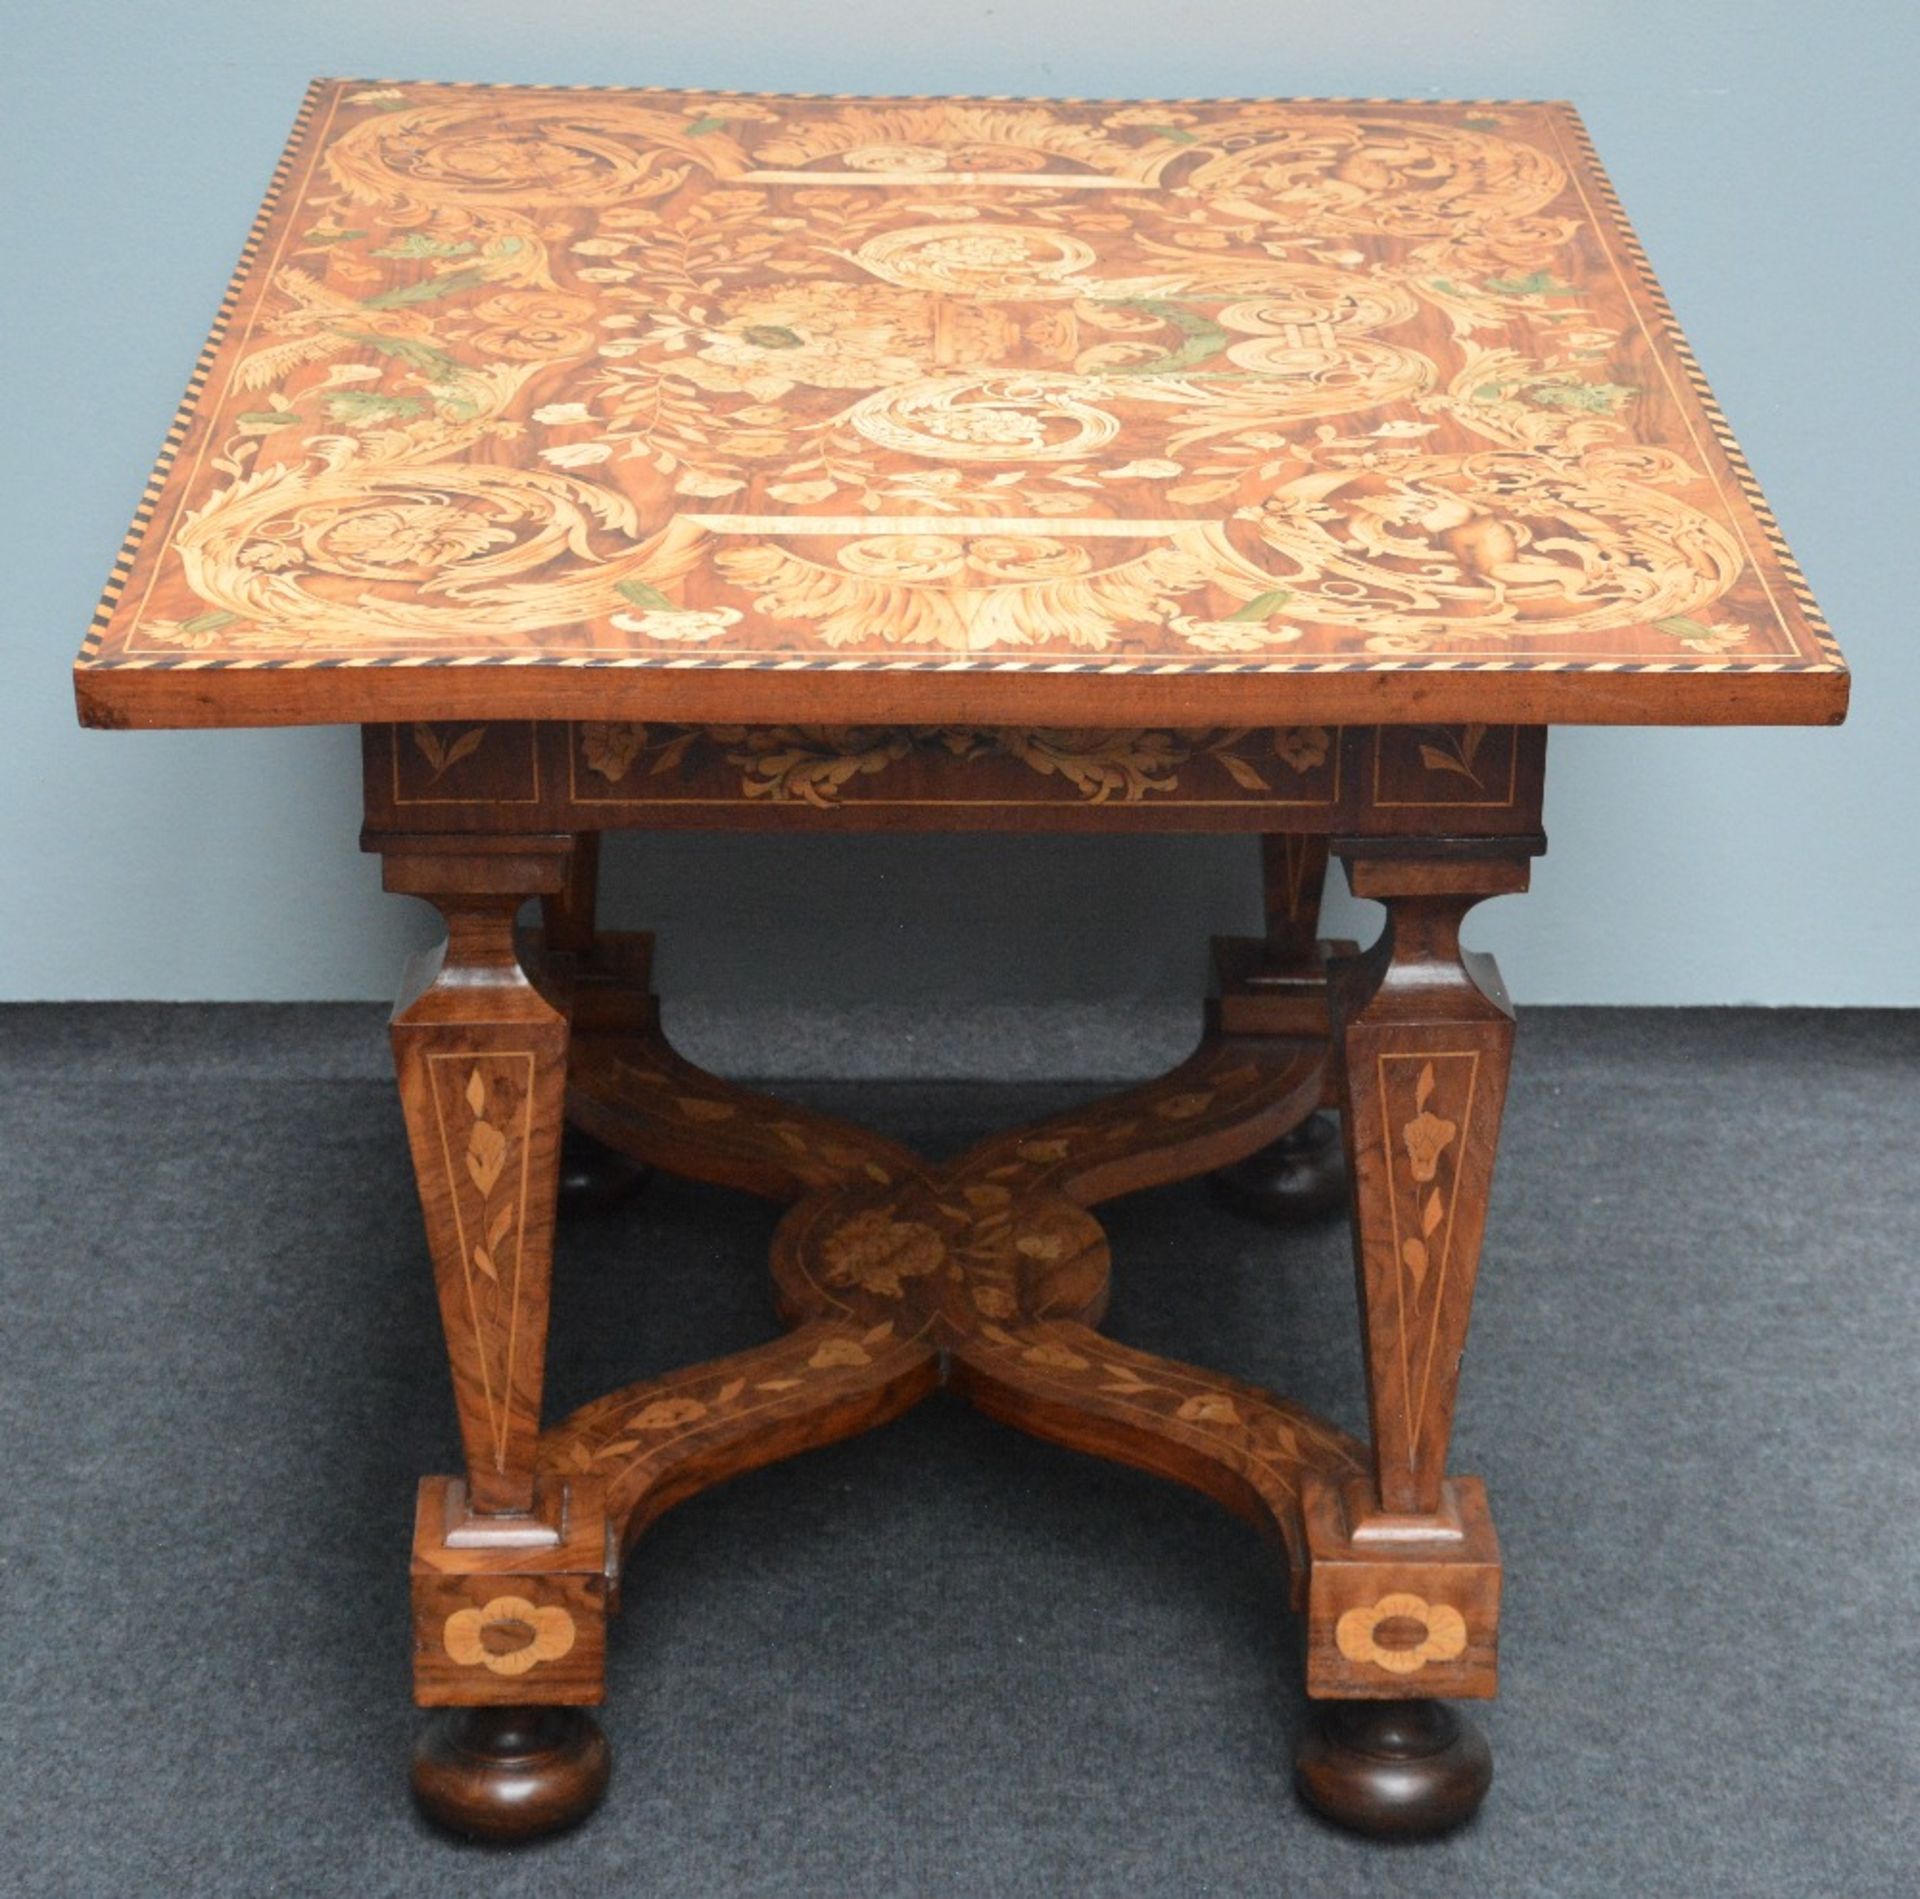 An exceptional LXIV-style Dutch writing desk with walnut veneer and marquetry, early 18thC; added - Bild 6 aus 11